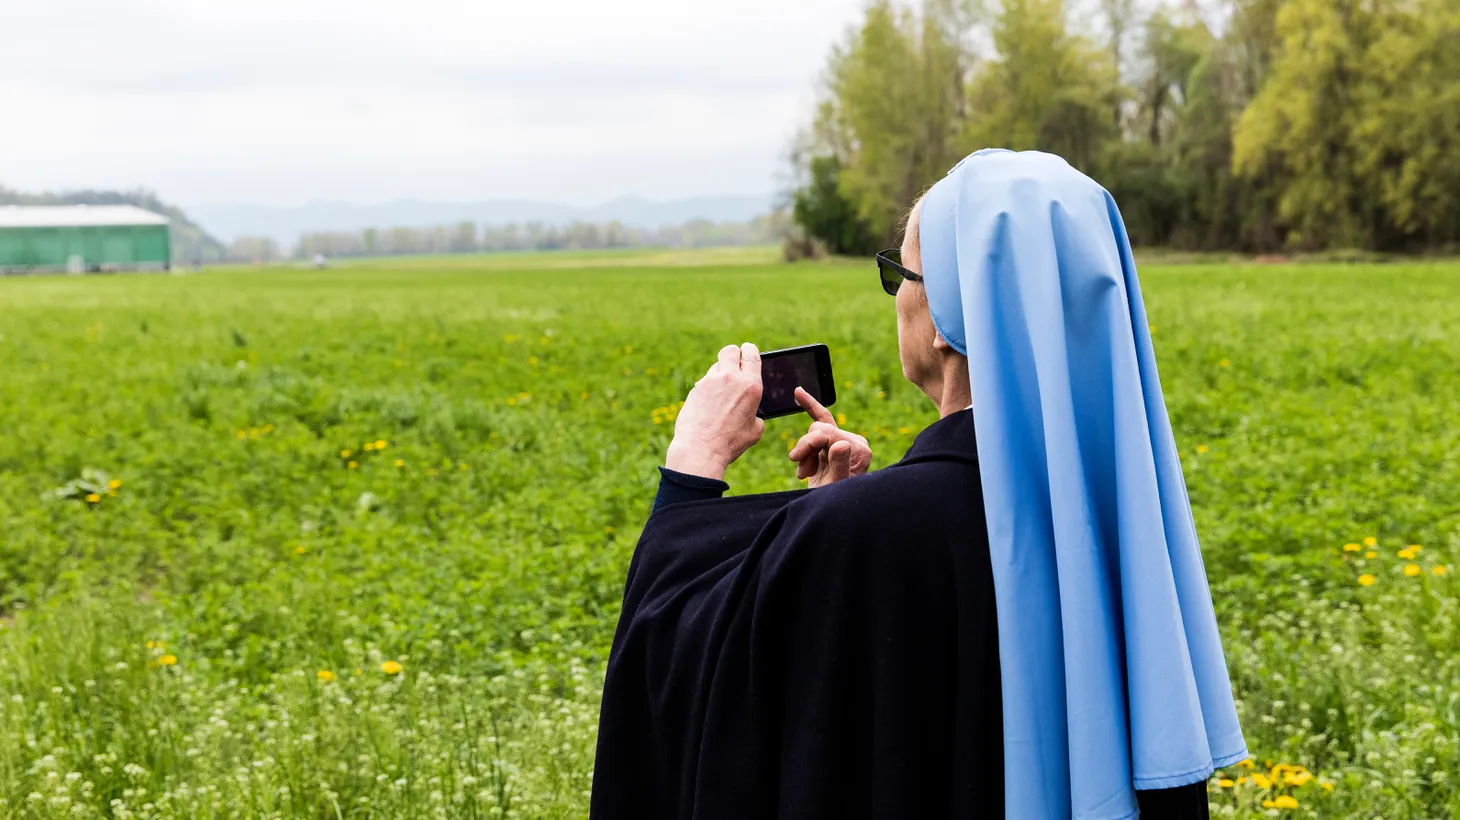 Nuns are taking to social media to give their legions of followers a behind-the-scenes look at their lives.